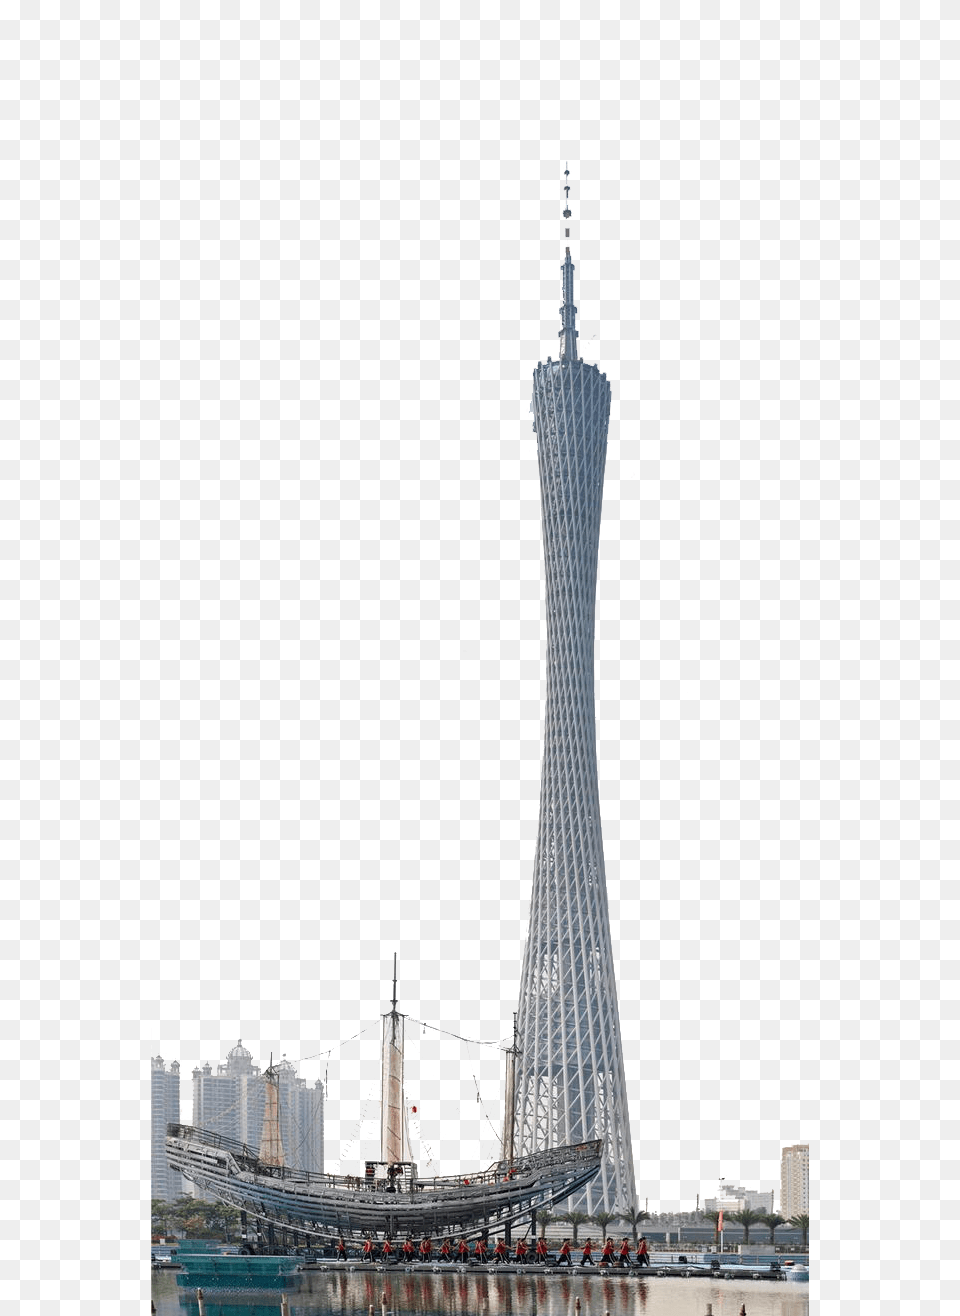 Image, Architecture, Building, Tower, Boat Png